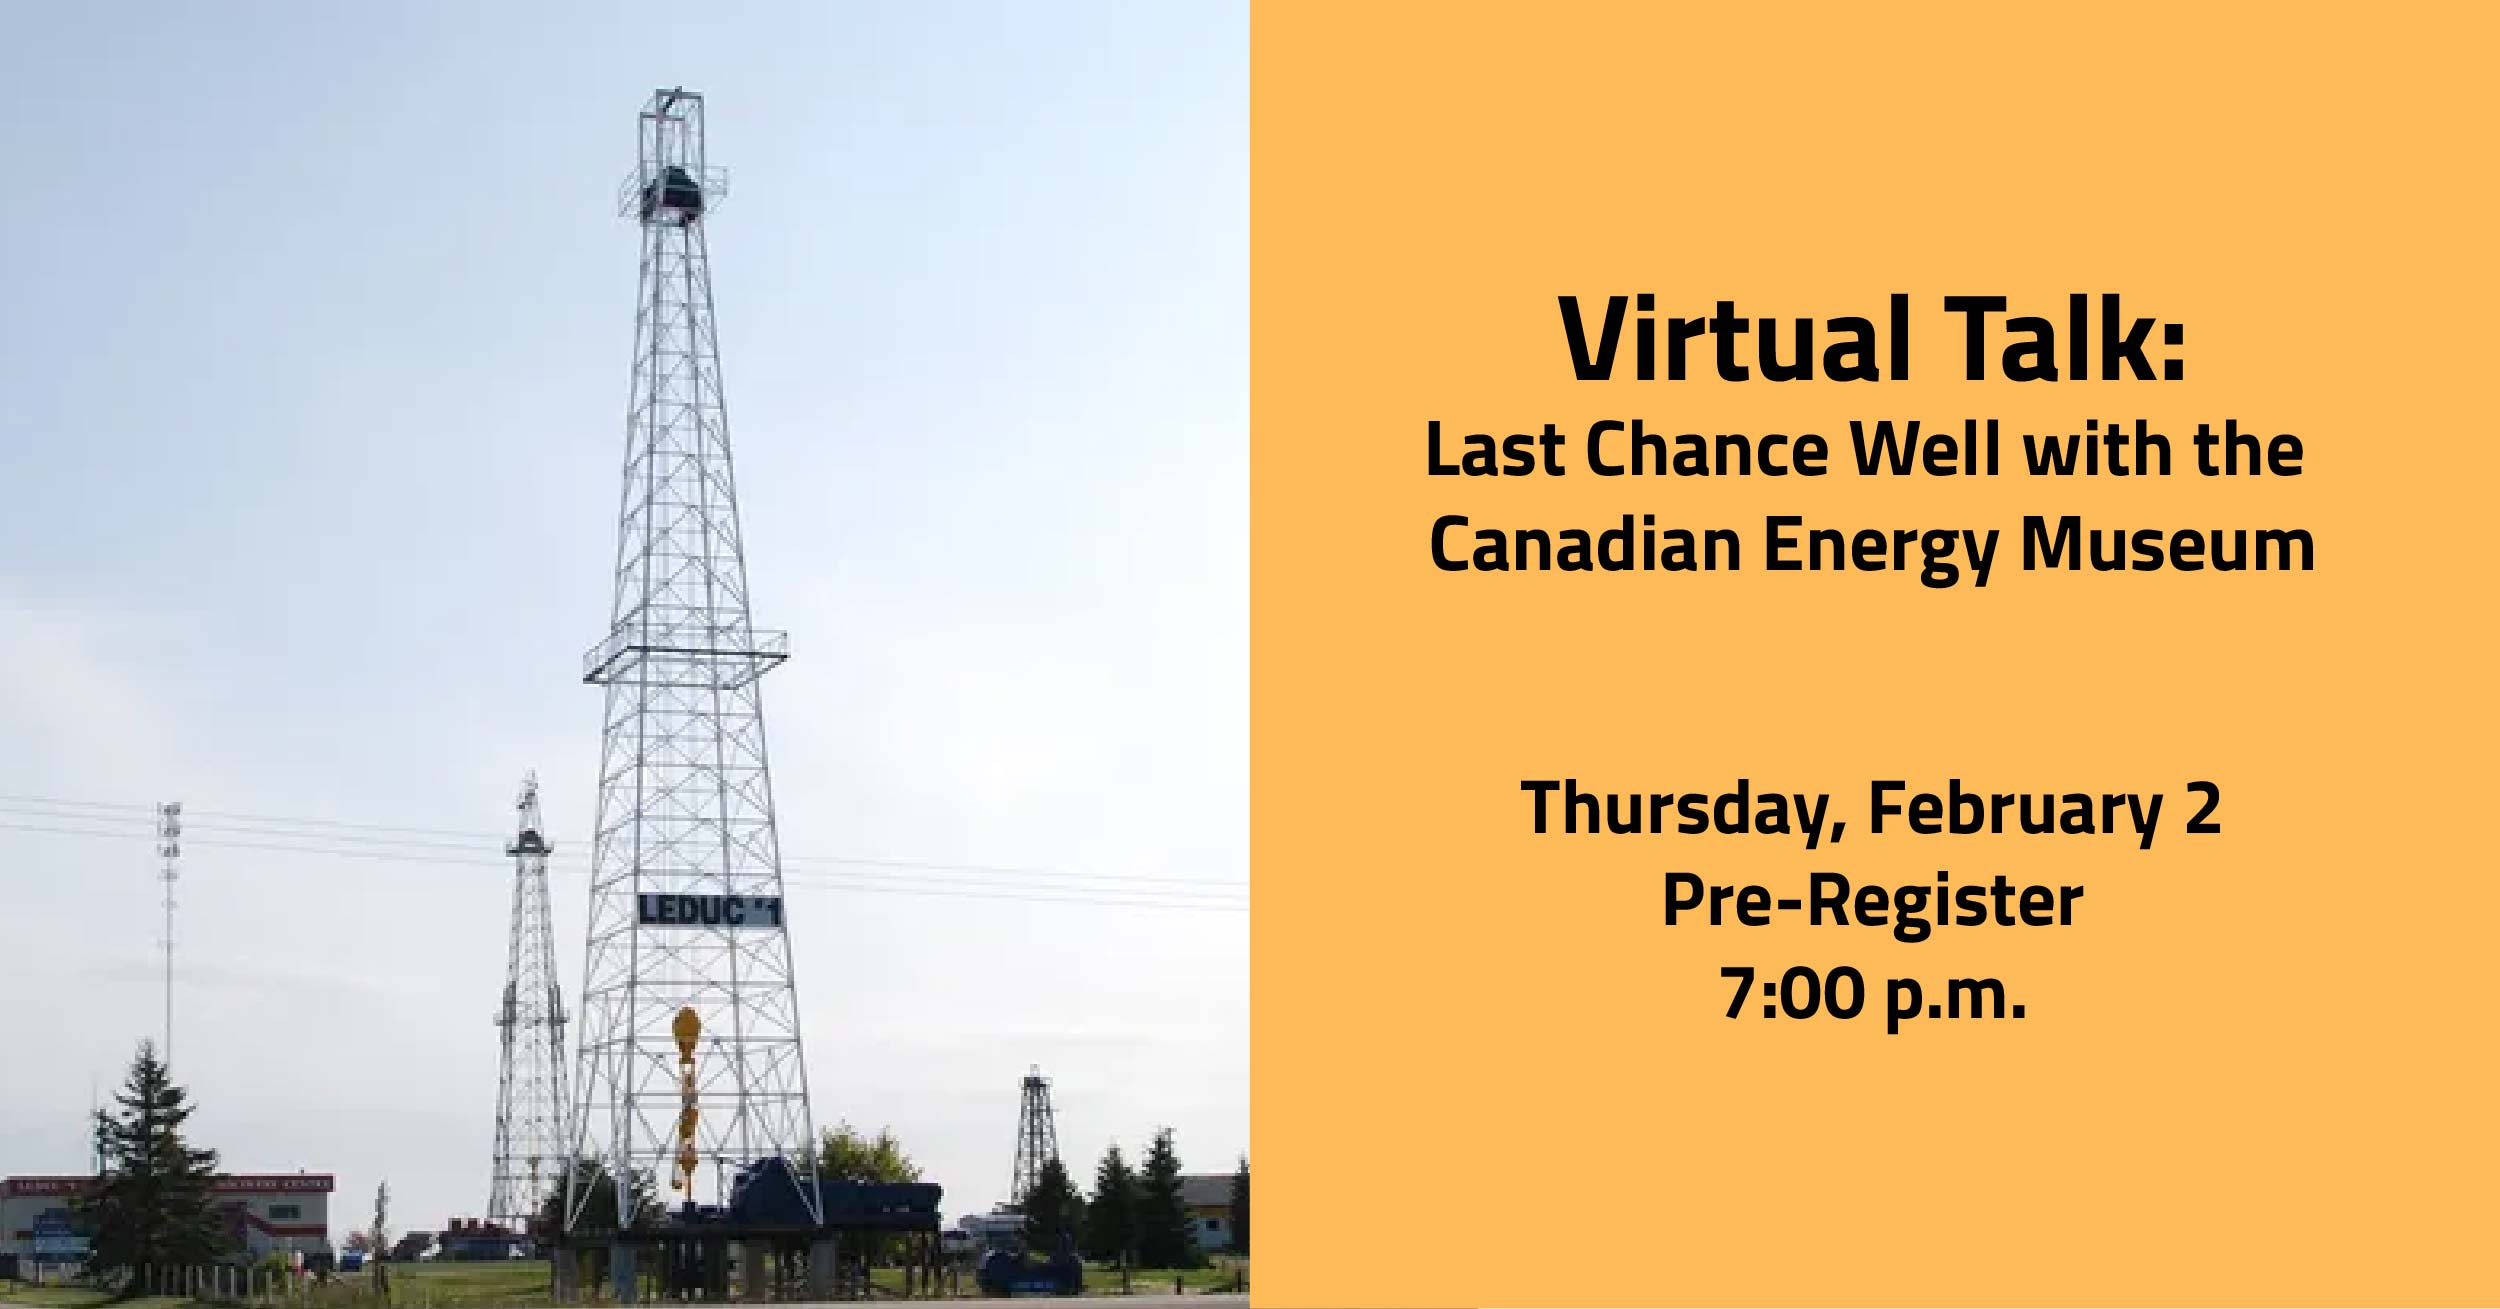 Virtual Talk promotional image for Last Chance Well